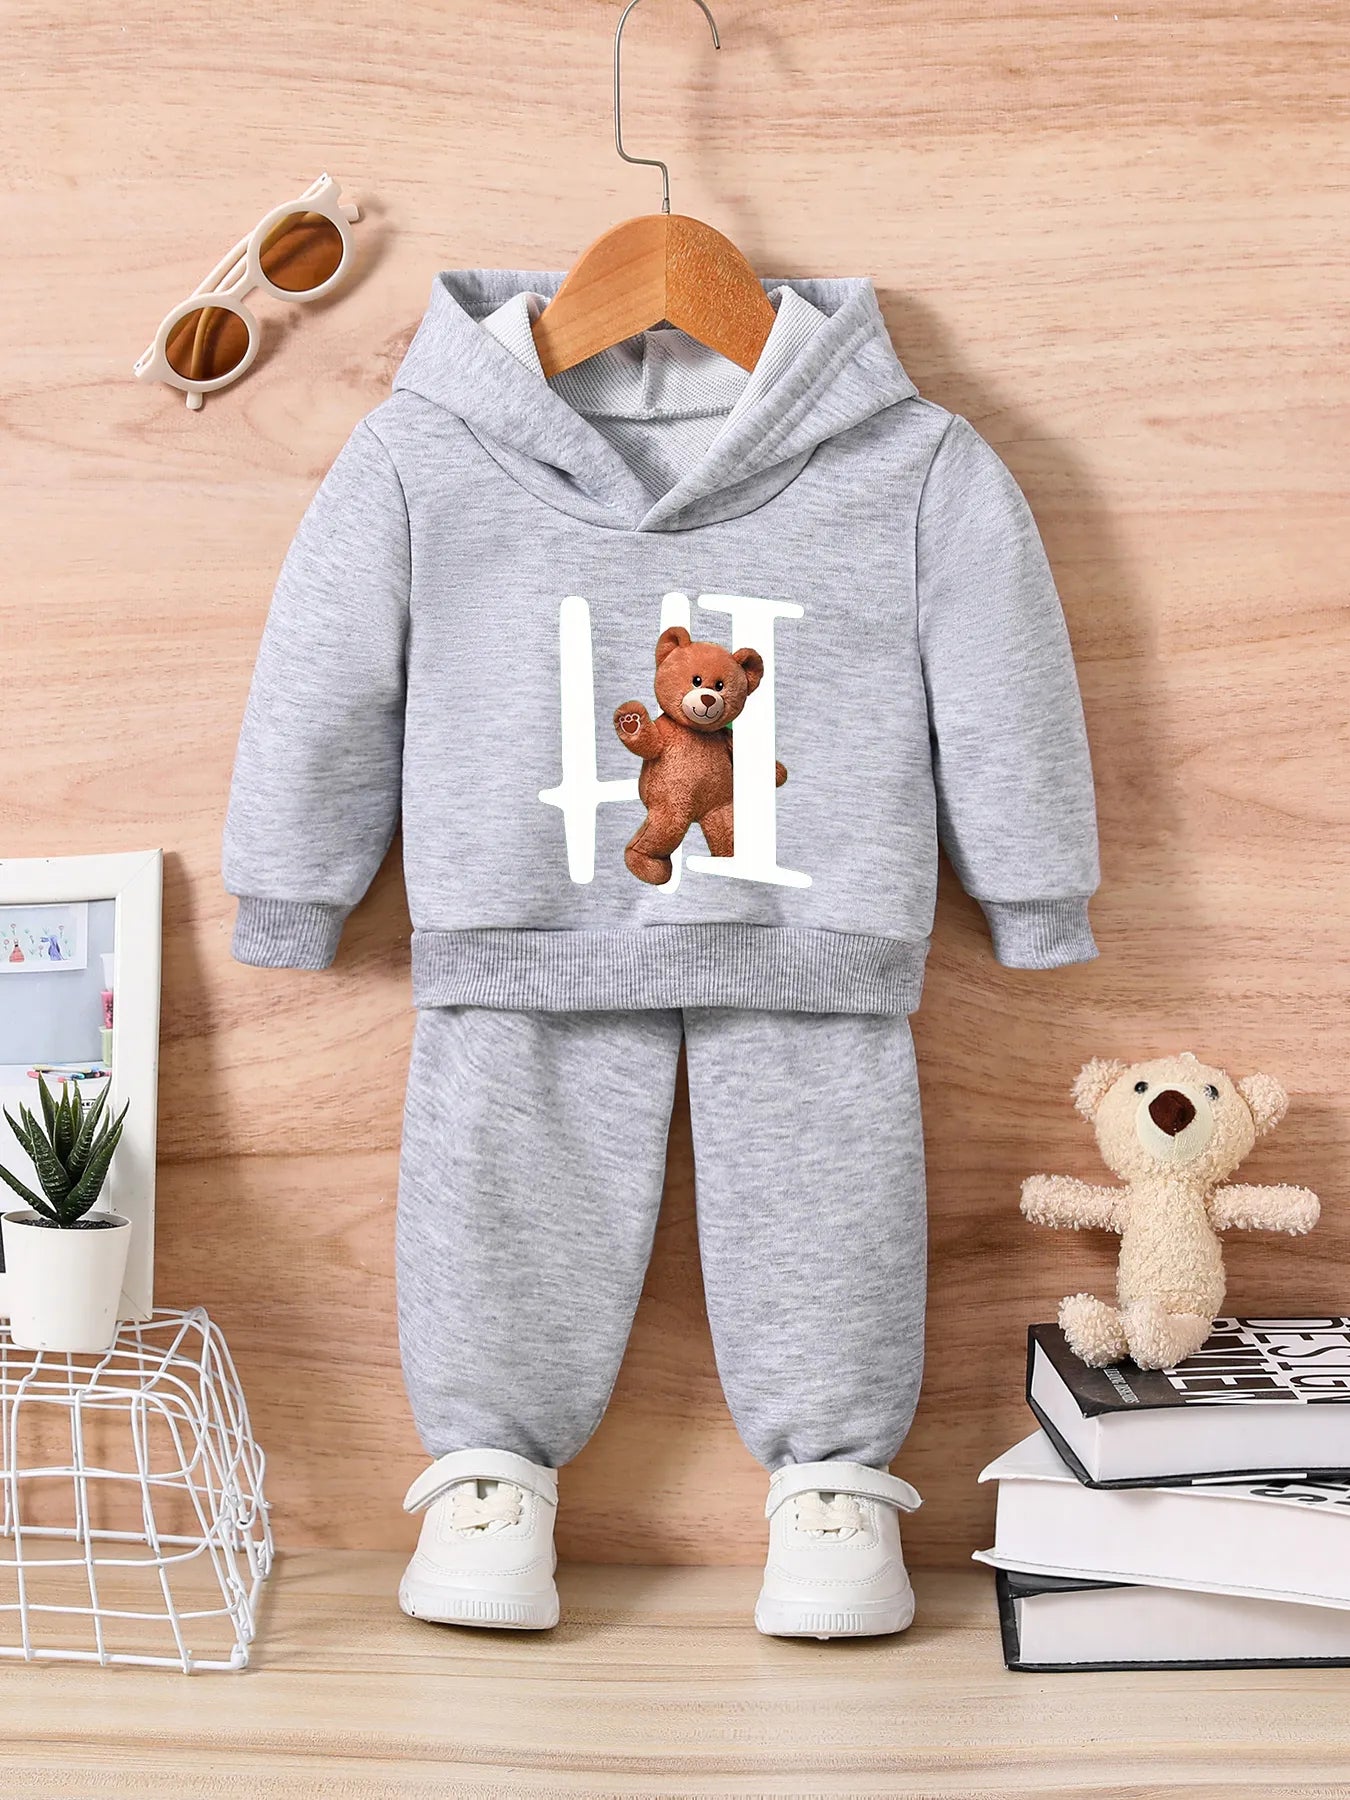 Fashion hot Bear Top and Pants Toddler Clothing Outfit 0-36M"